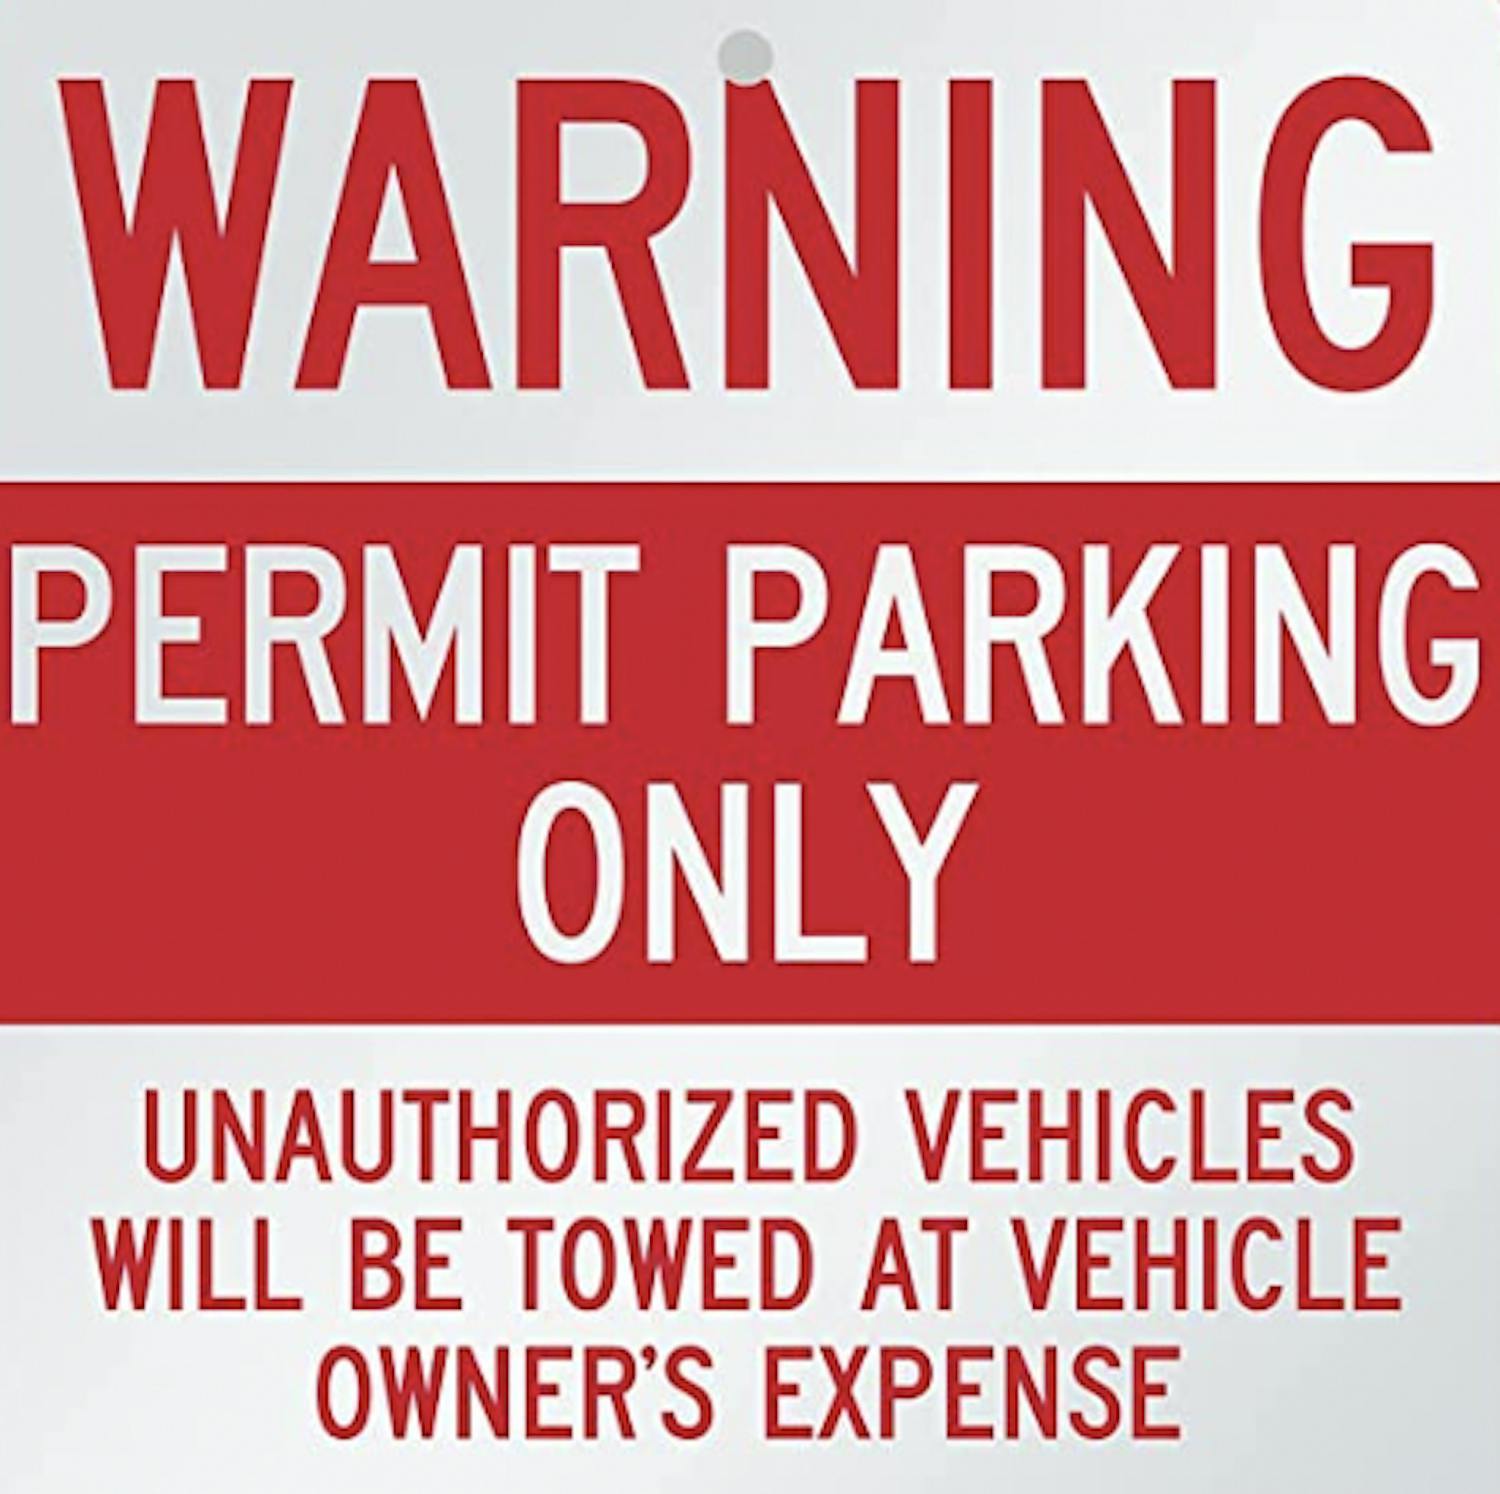 WARNING! Permit Parking Only